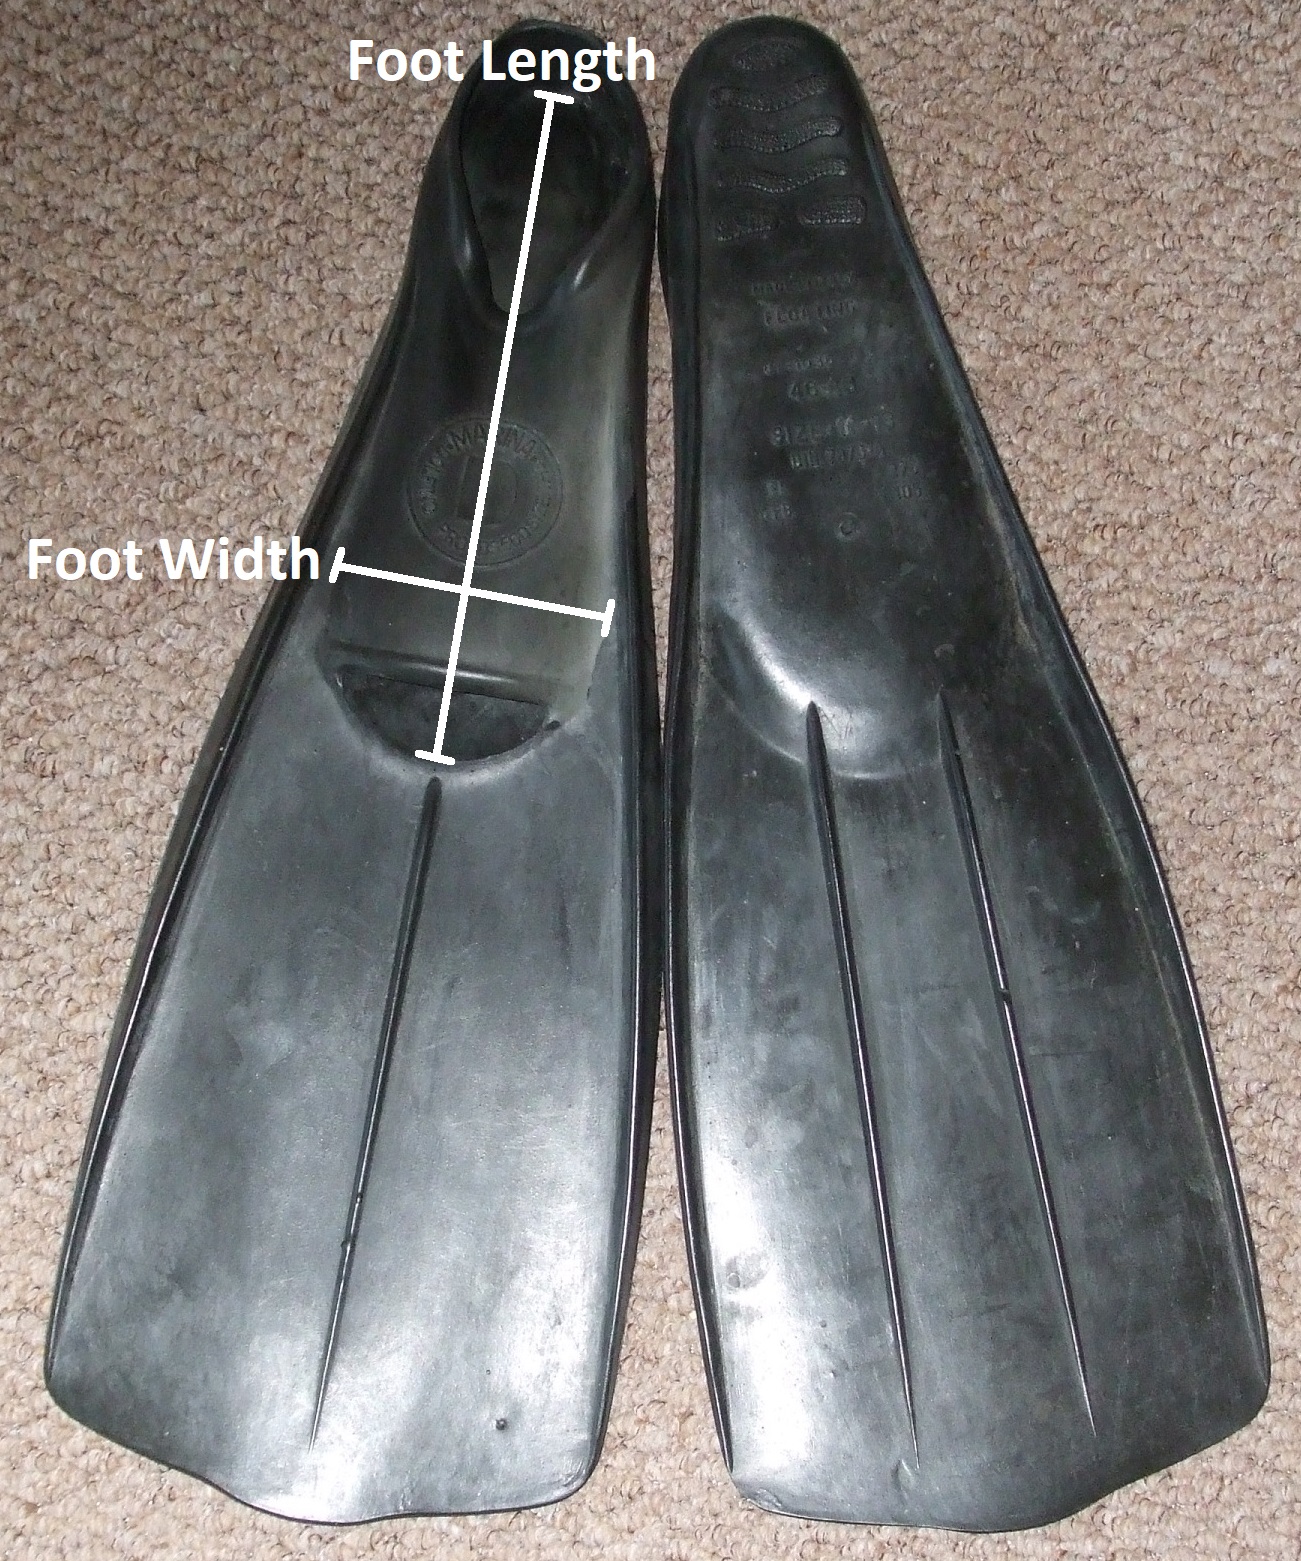 Marina Delfino full-foot fins with indication of foot length and foot width